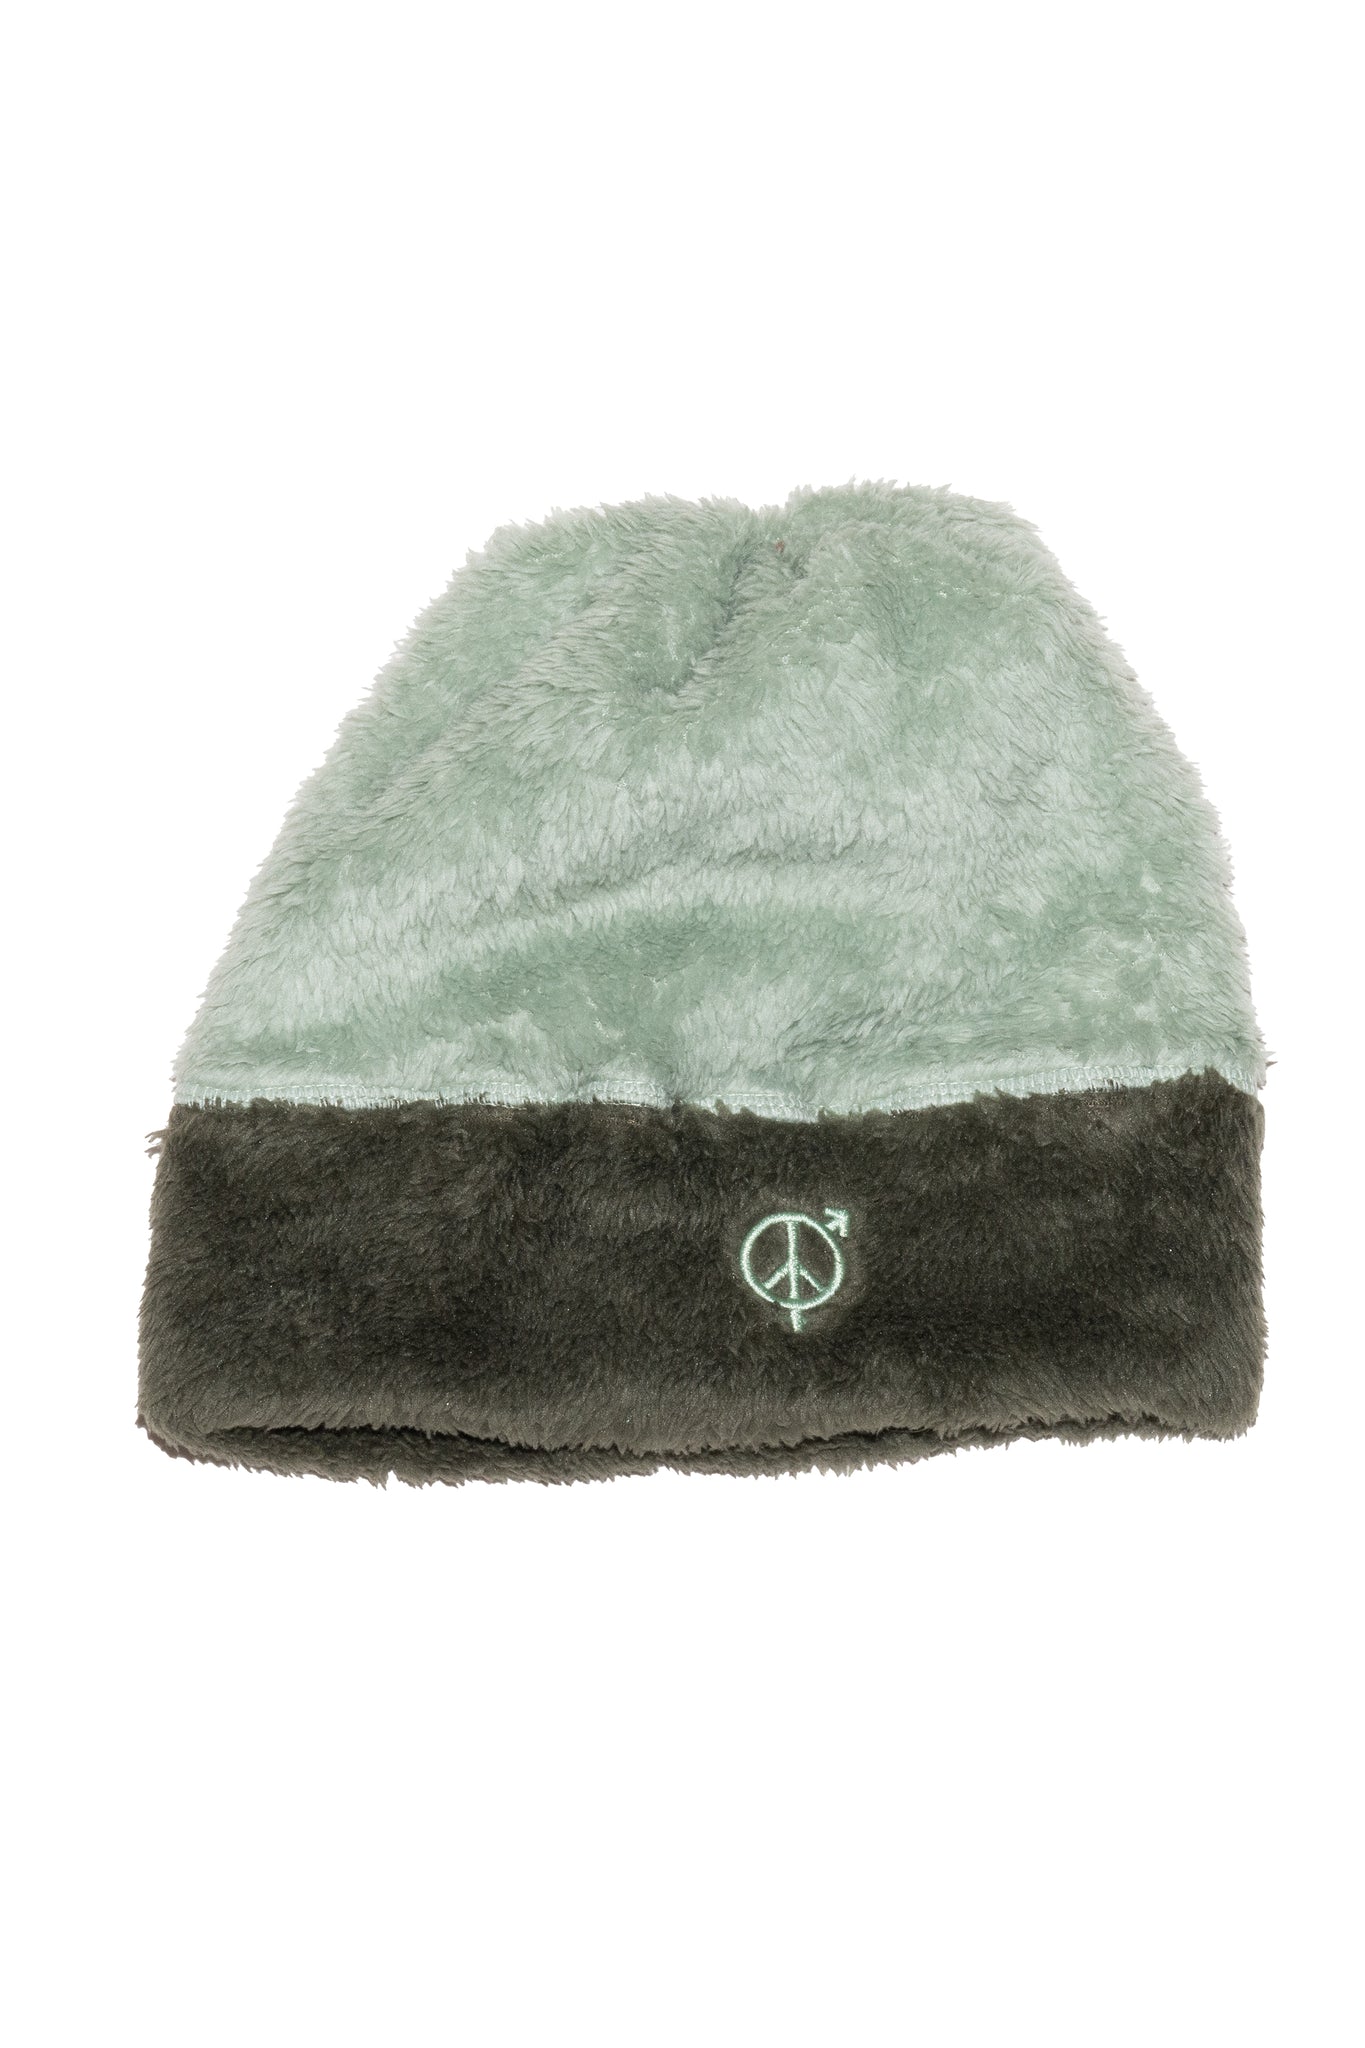 2 TONE FLEECE BEANIE IN OLIVE/FOREST